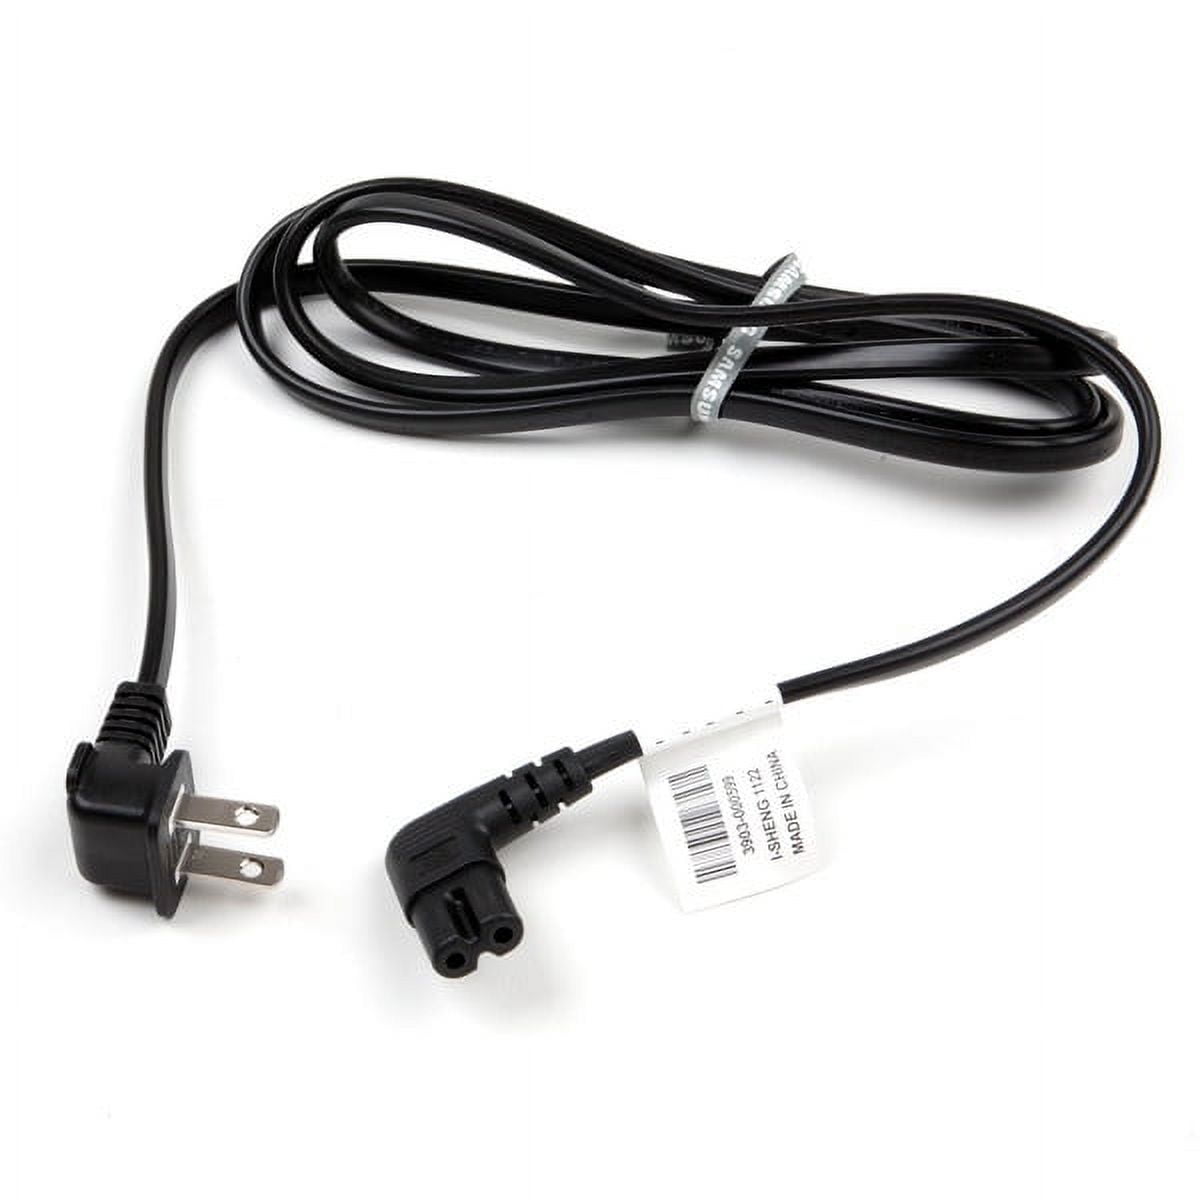 Samsung TV Power Cable Alimentation. (May fit other models)